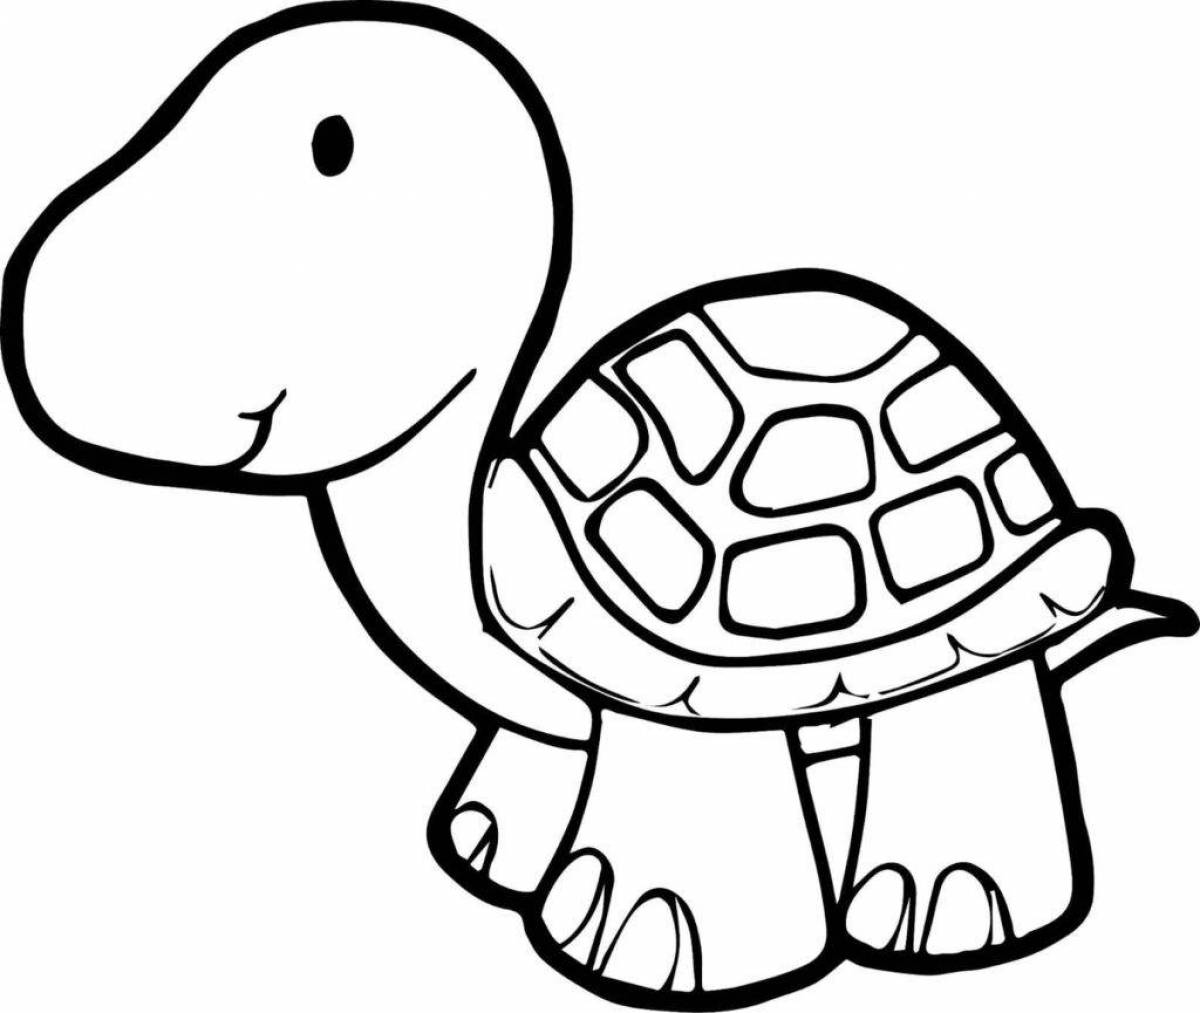 Turtle for kids #15